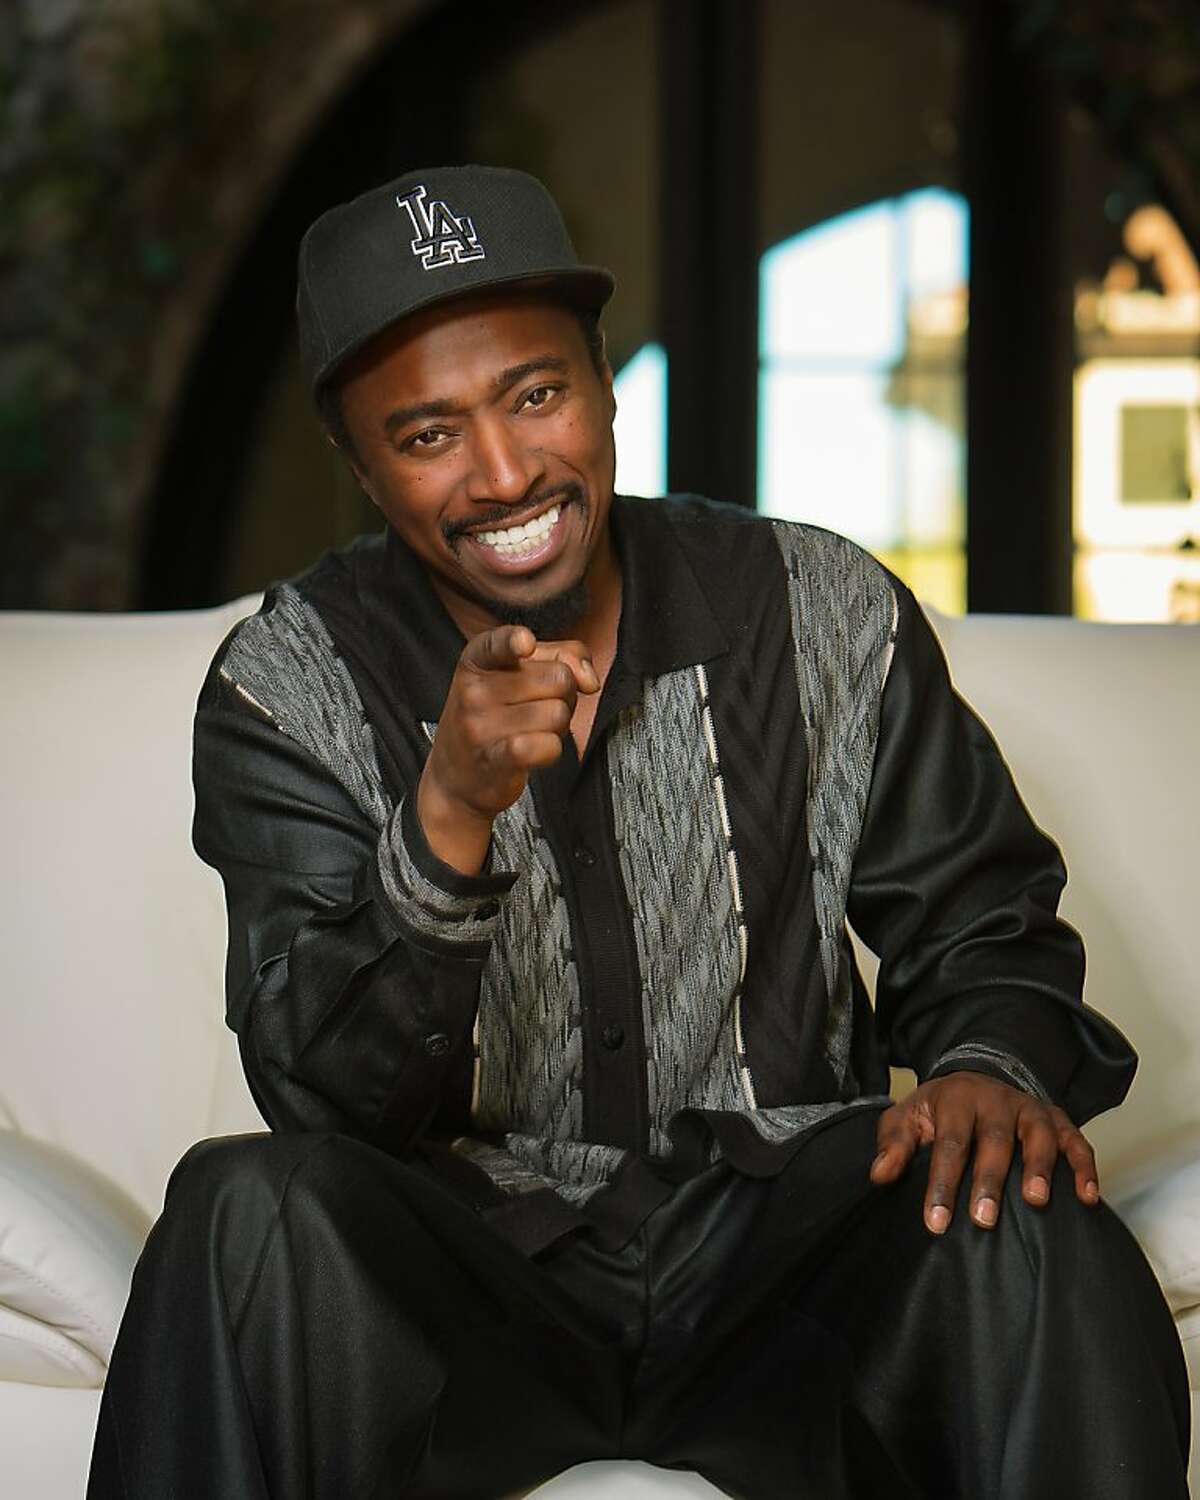 Comedian and actor Eddie Griffin, best known for his TV show "Malcolm and Eddie" and movies like "John Q" and "Undercover Brother," brings his stand-up act to the San Jose Improv Friday and Saturday. Photo courtesy of Eddie Griffin